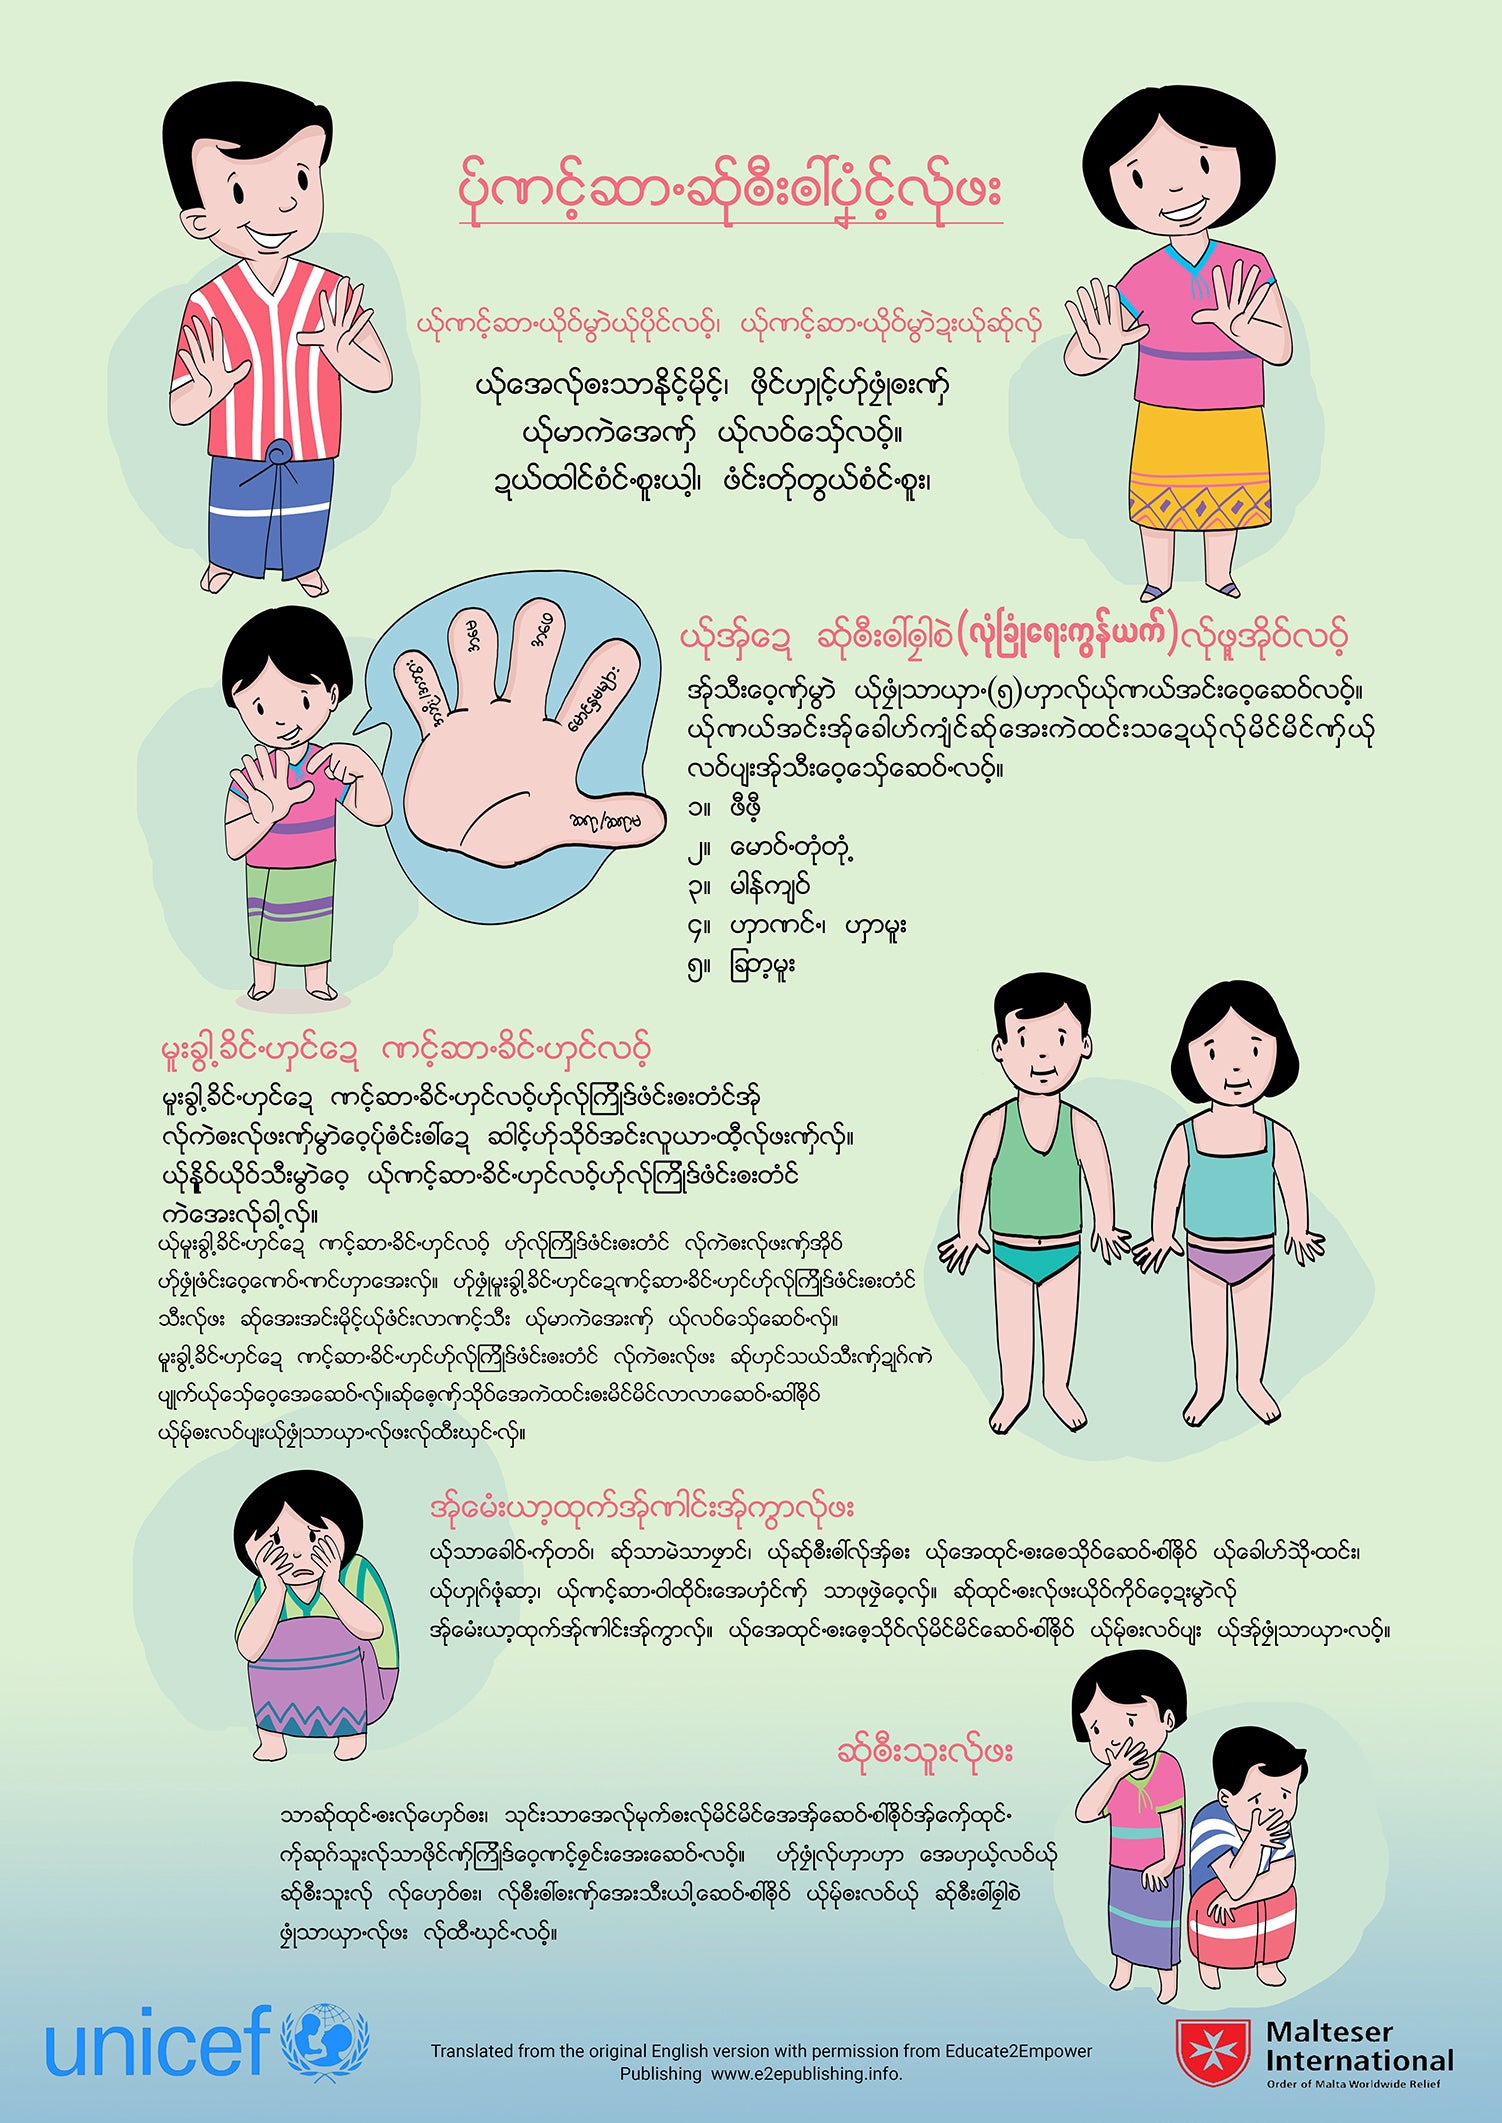 Body Safety Rules poster for children, written in the Poe Kayin Language